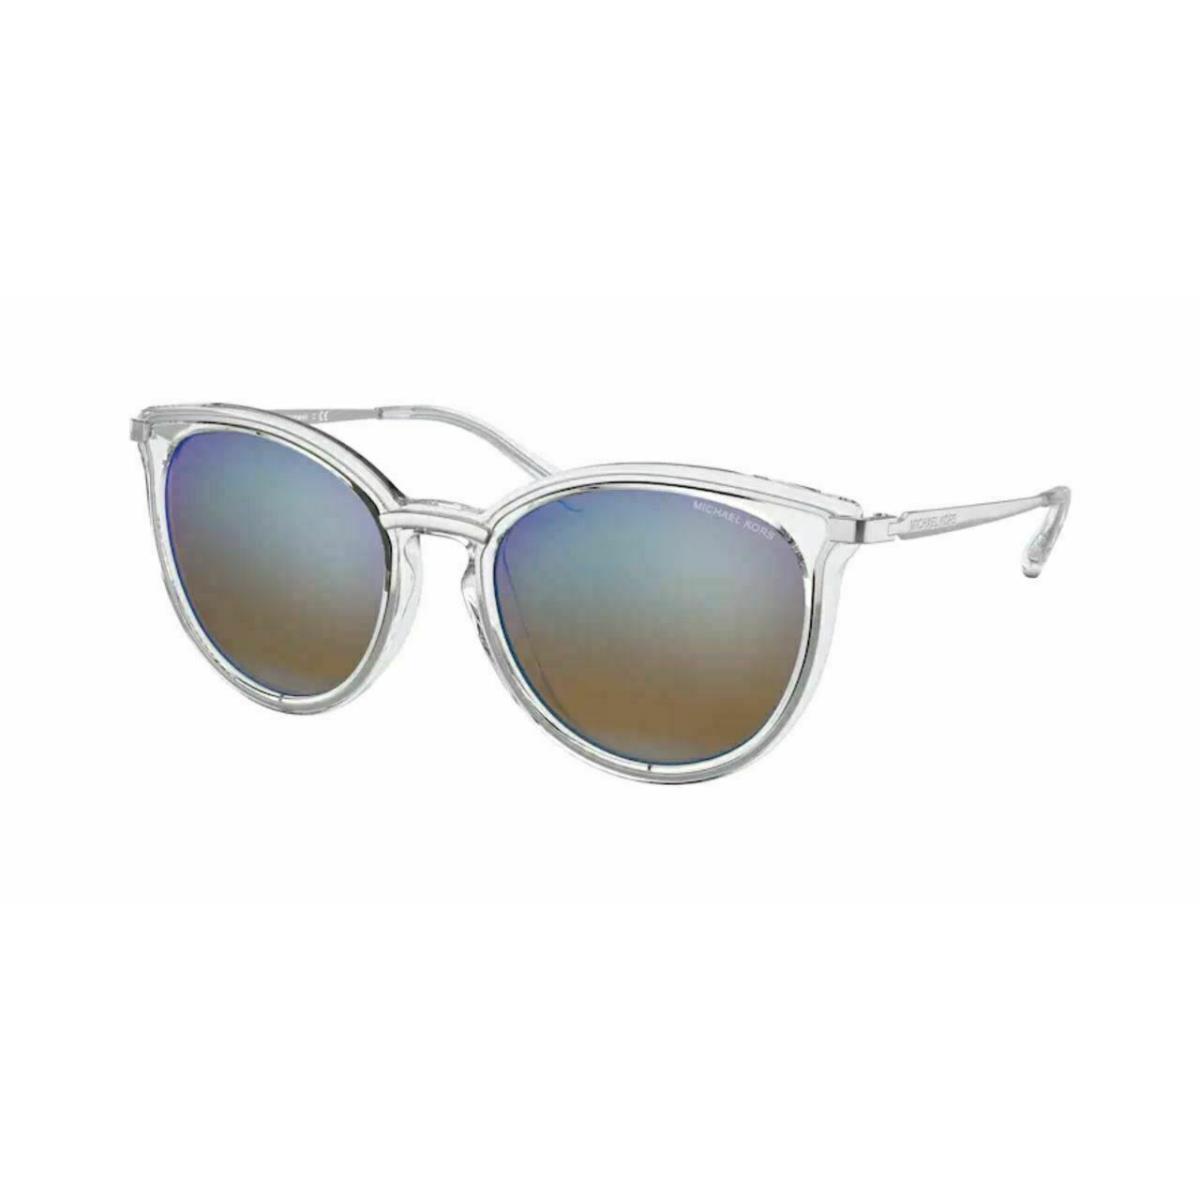 Michael Kors MK1077 1153Y7 Silver Clear Round Women`s 54 mm Sunglasses